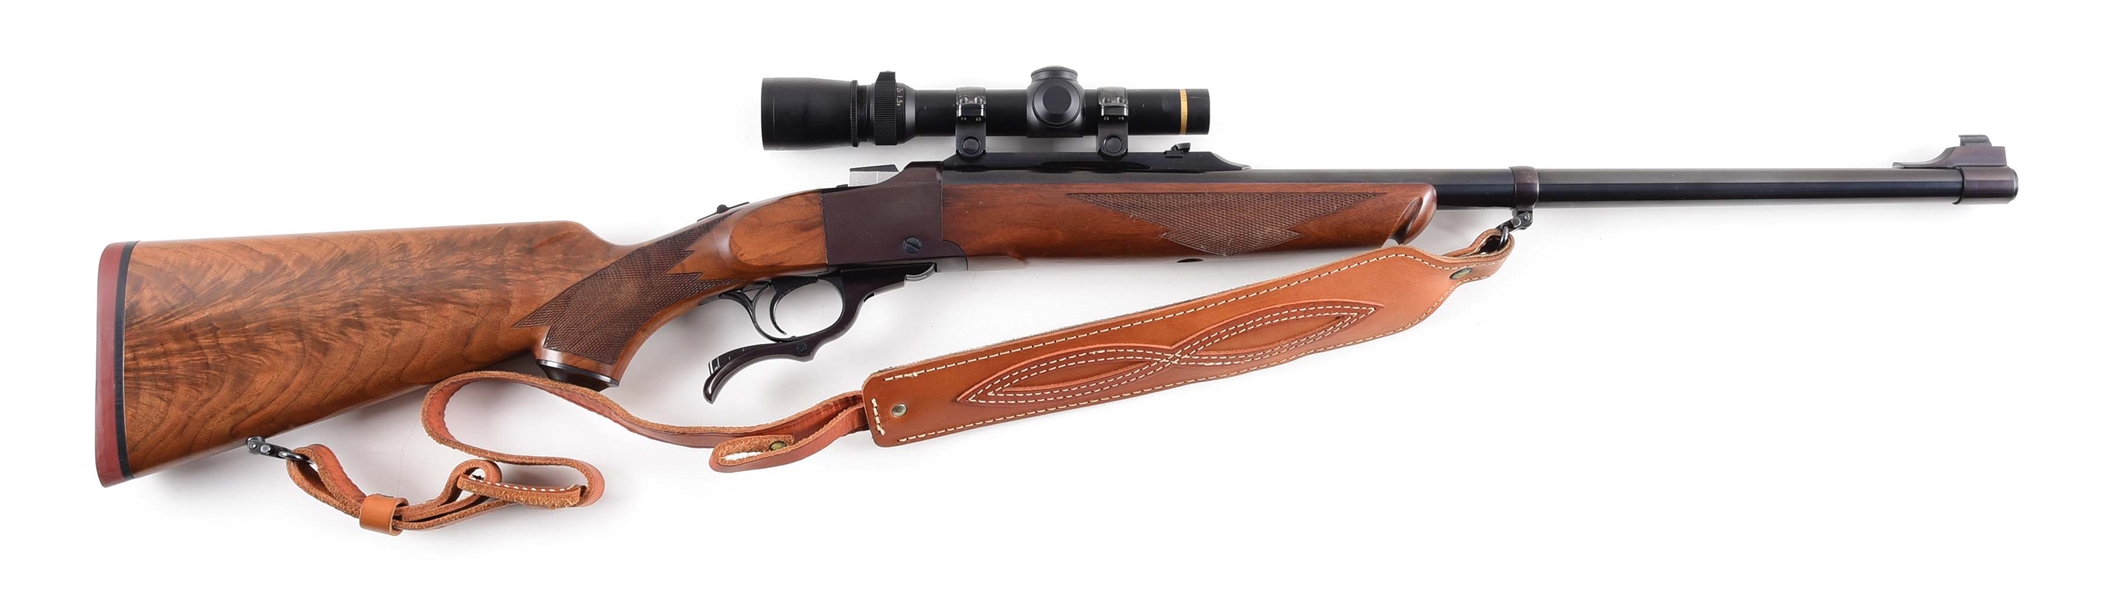 (M) RUGER NO. 1 SINGLE SHOT RIFLE IN .375 H&H WITH SCOPE AND SLING.